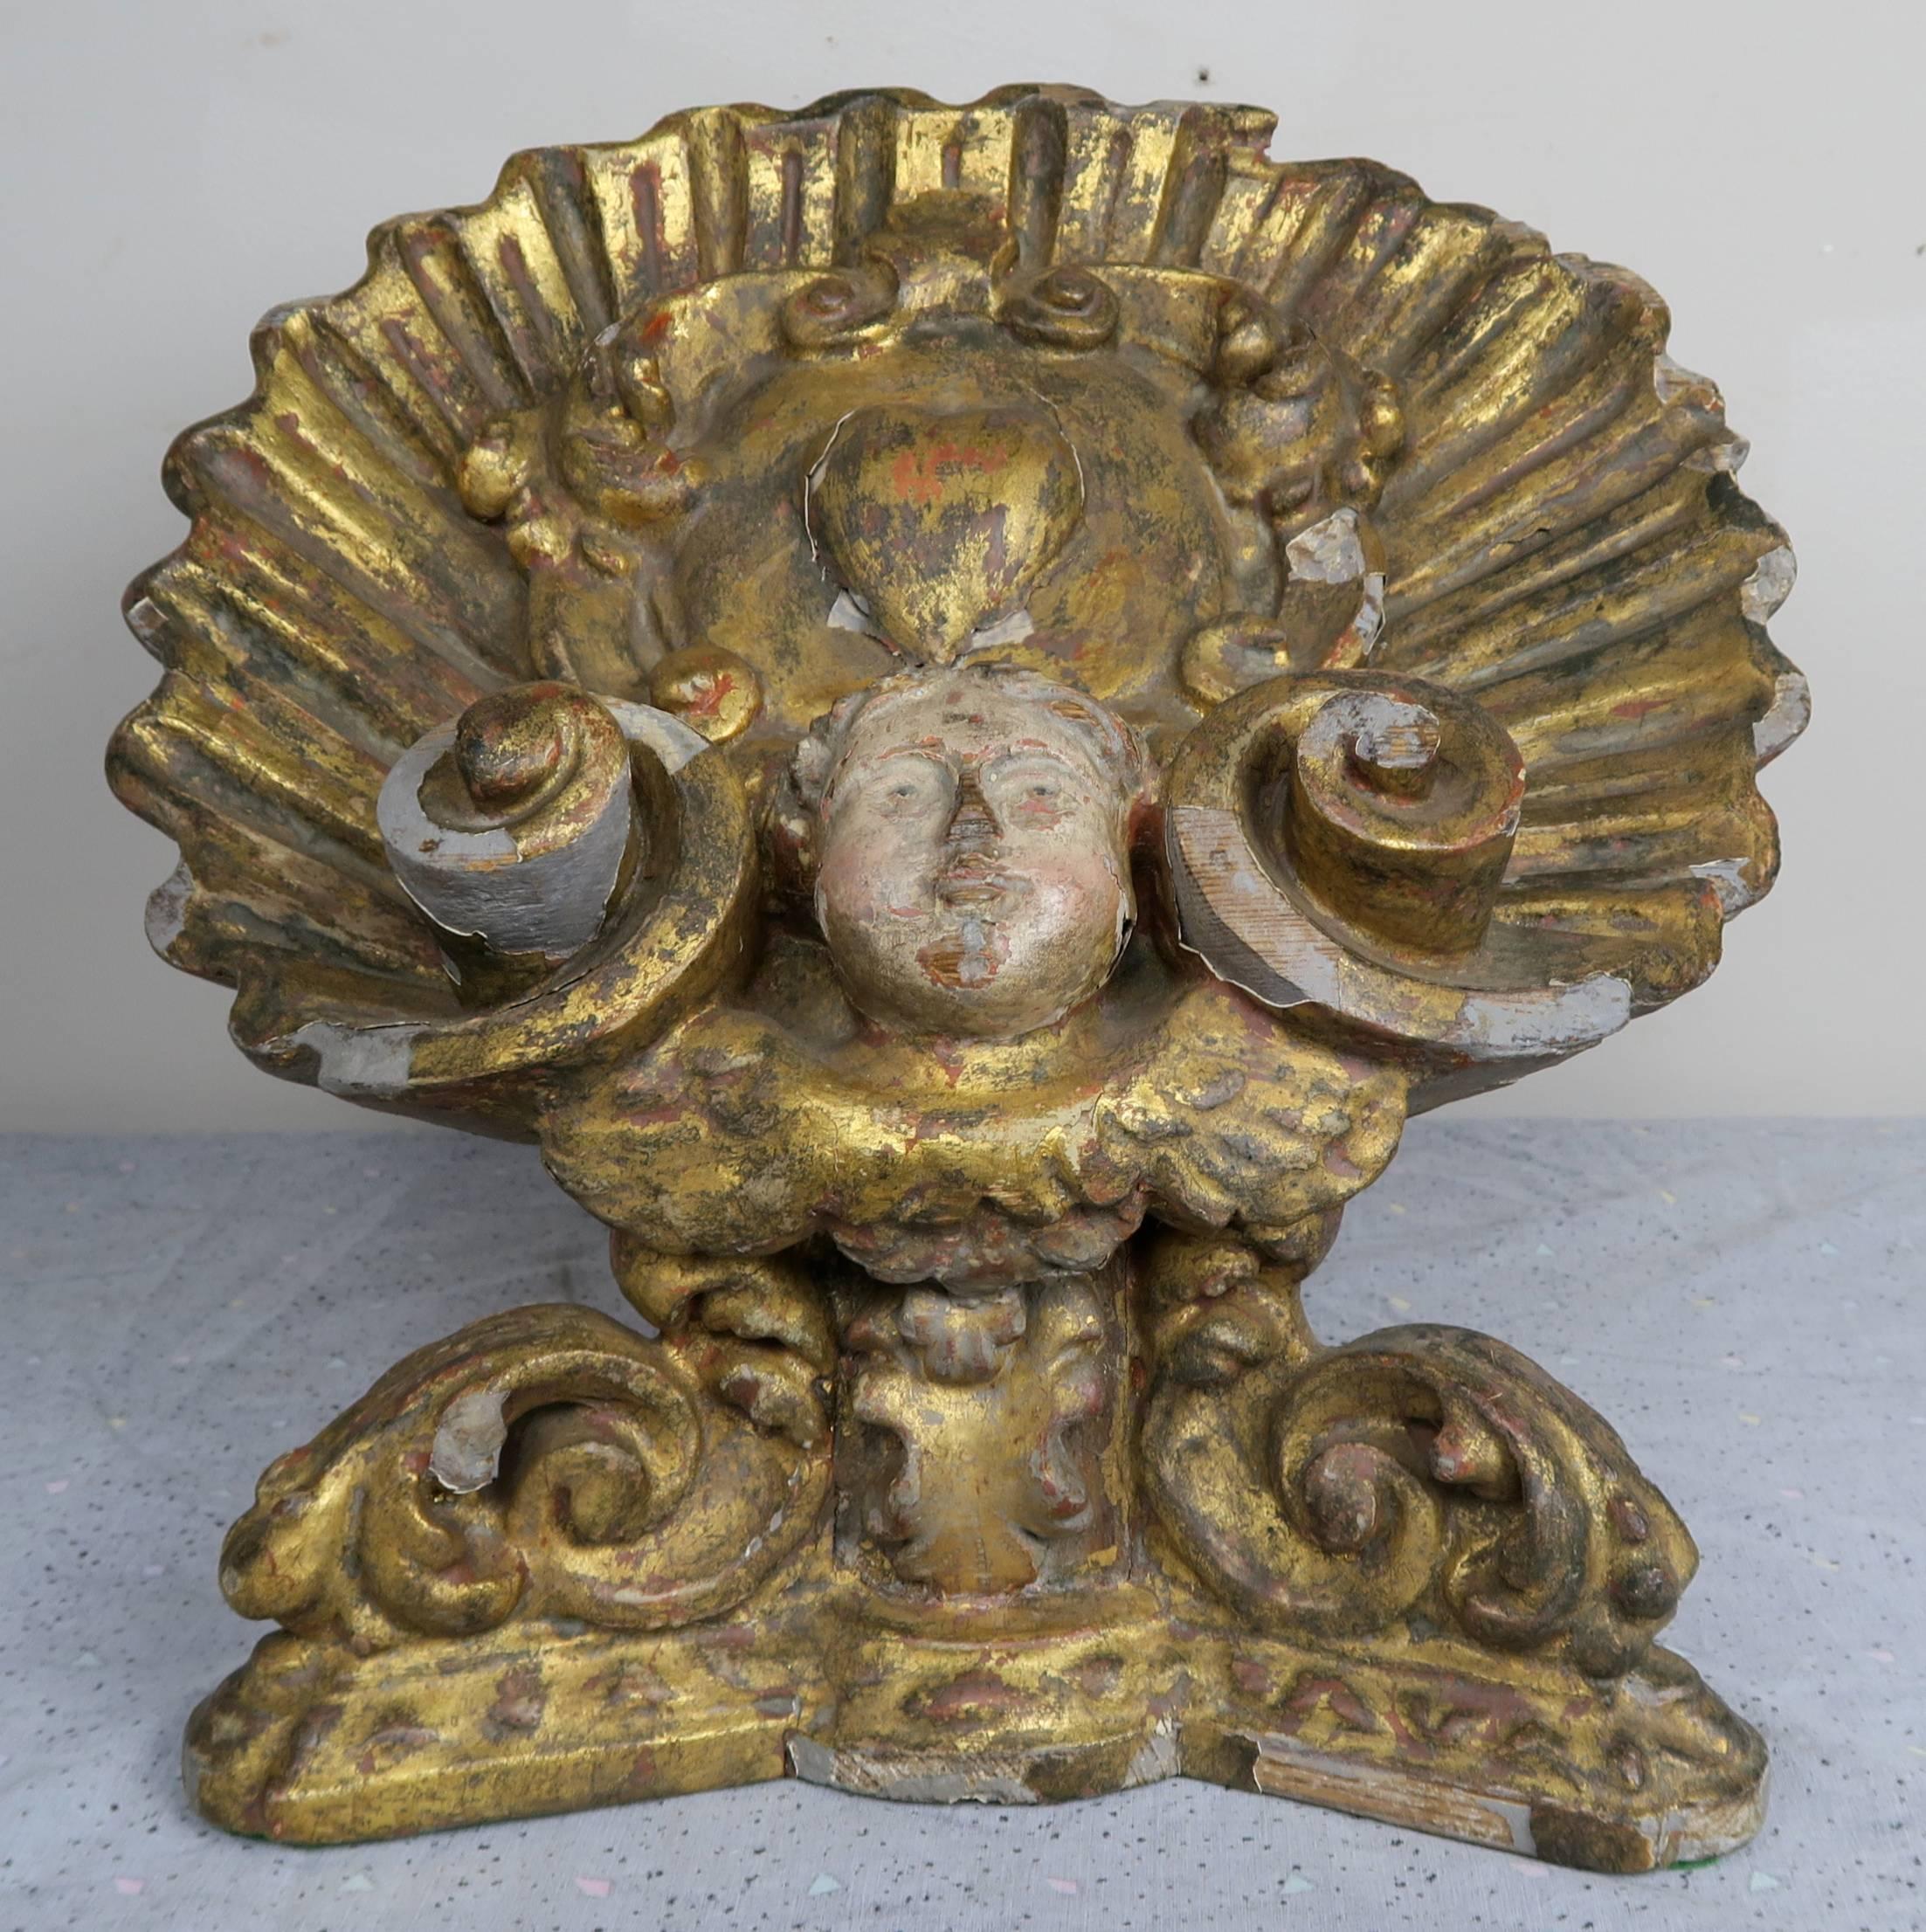 19th century carved giltwood polychromed book stand depicting a cherub face surrounded by a large shell with a sacred heart motif in the centre. Beautiful scrolls carved throughout.